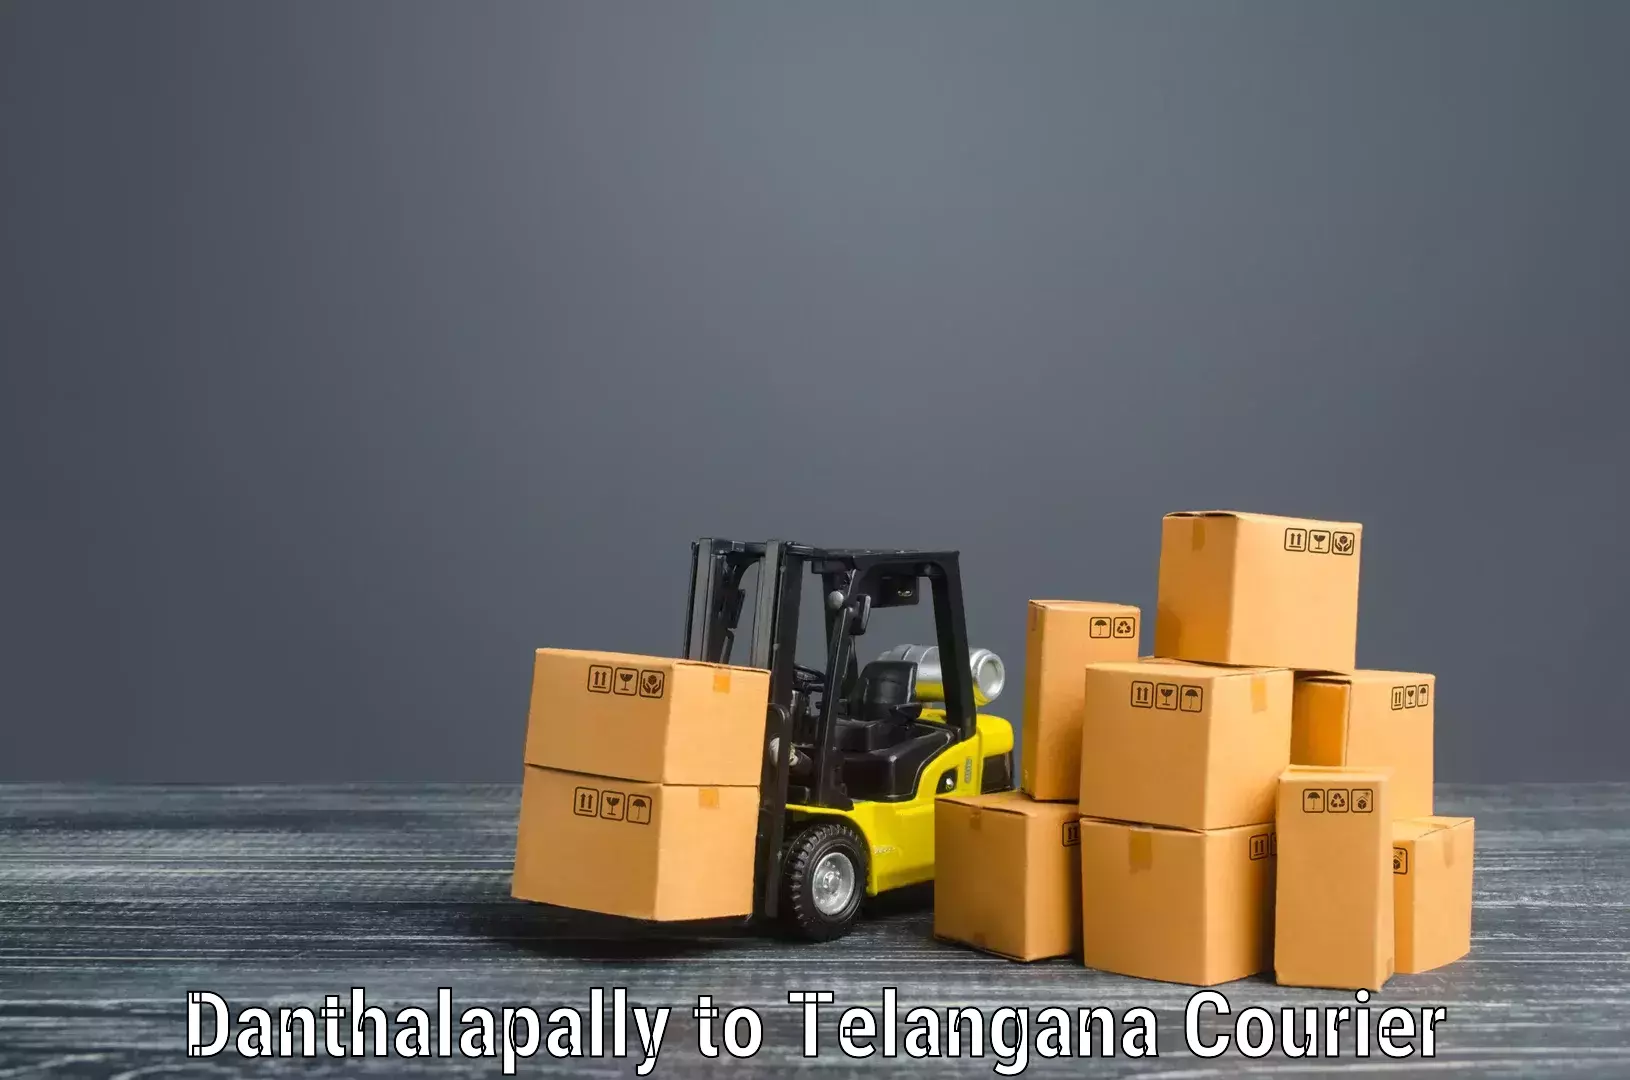 Home relocation experts Danthalapally to Rangareddy